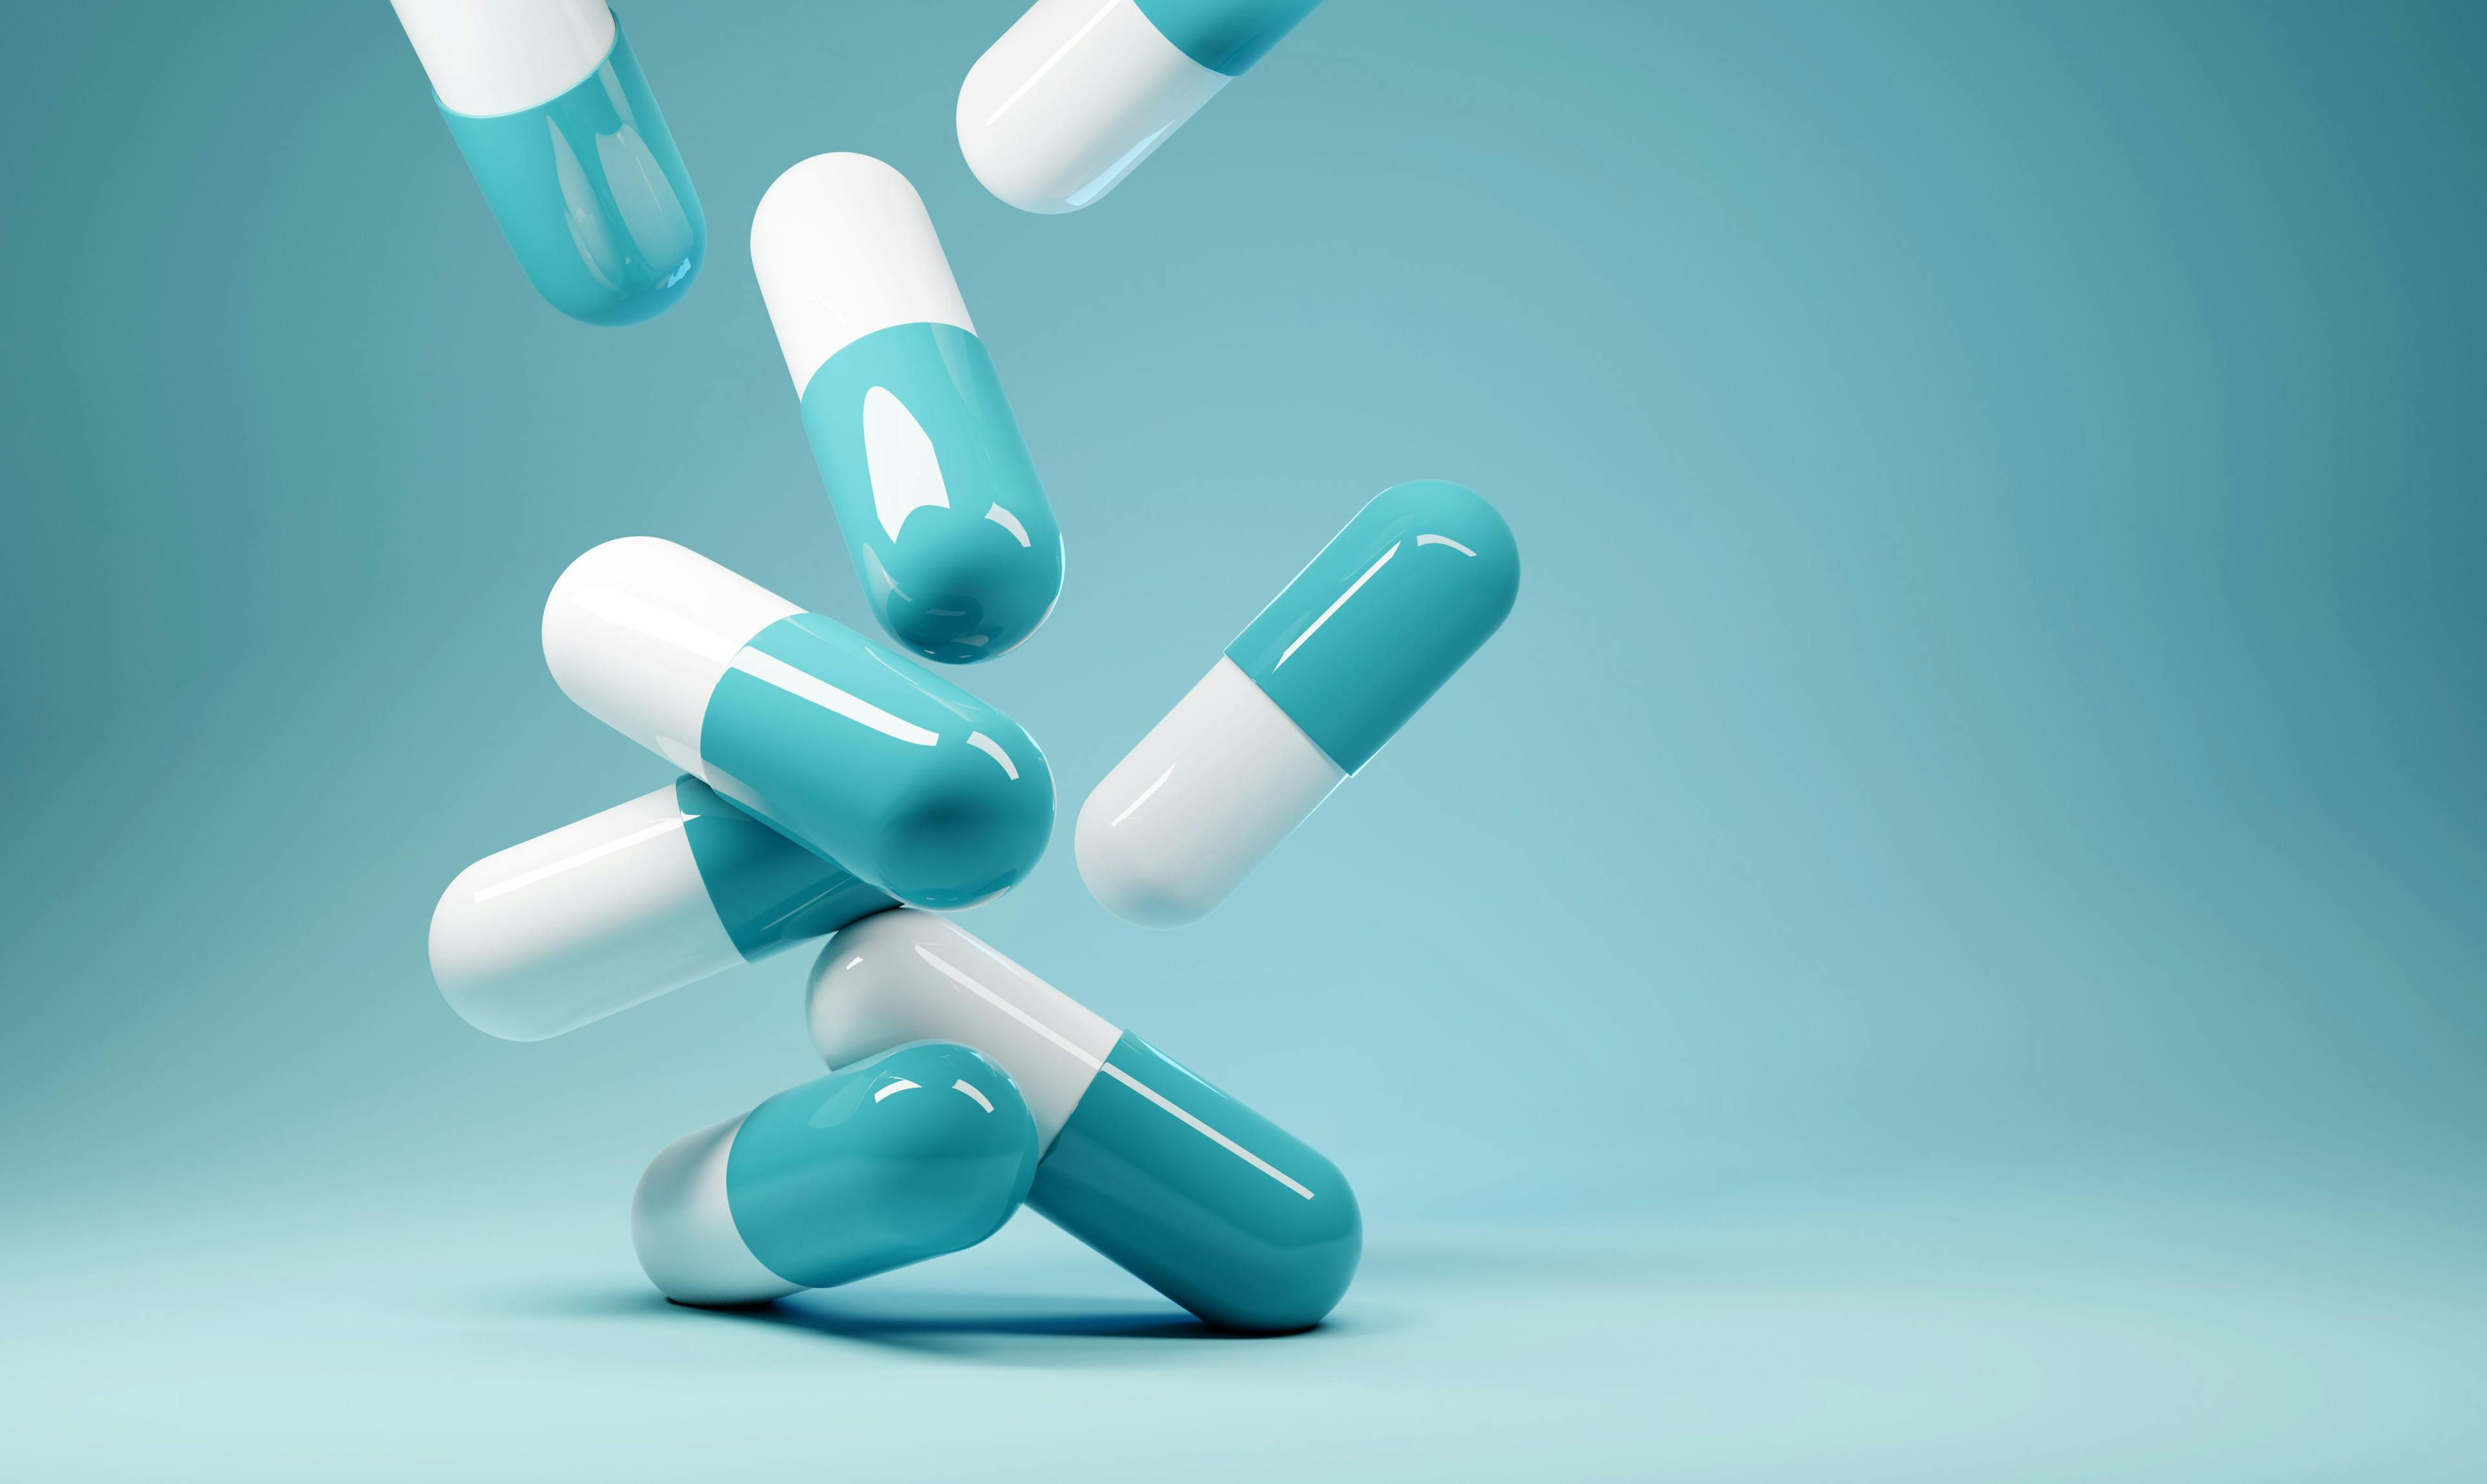 A group of antibiotic pill capsules falling. Healthcare and medical 3D illustration background | Image credit: James Thew - stock.adobe.com